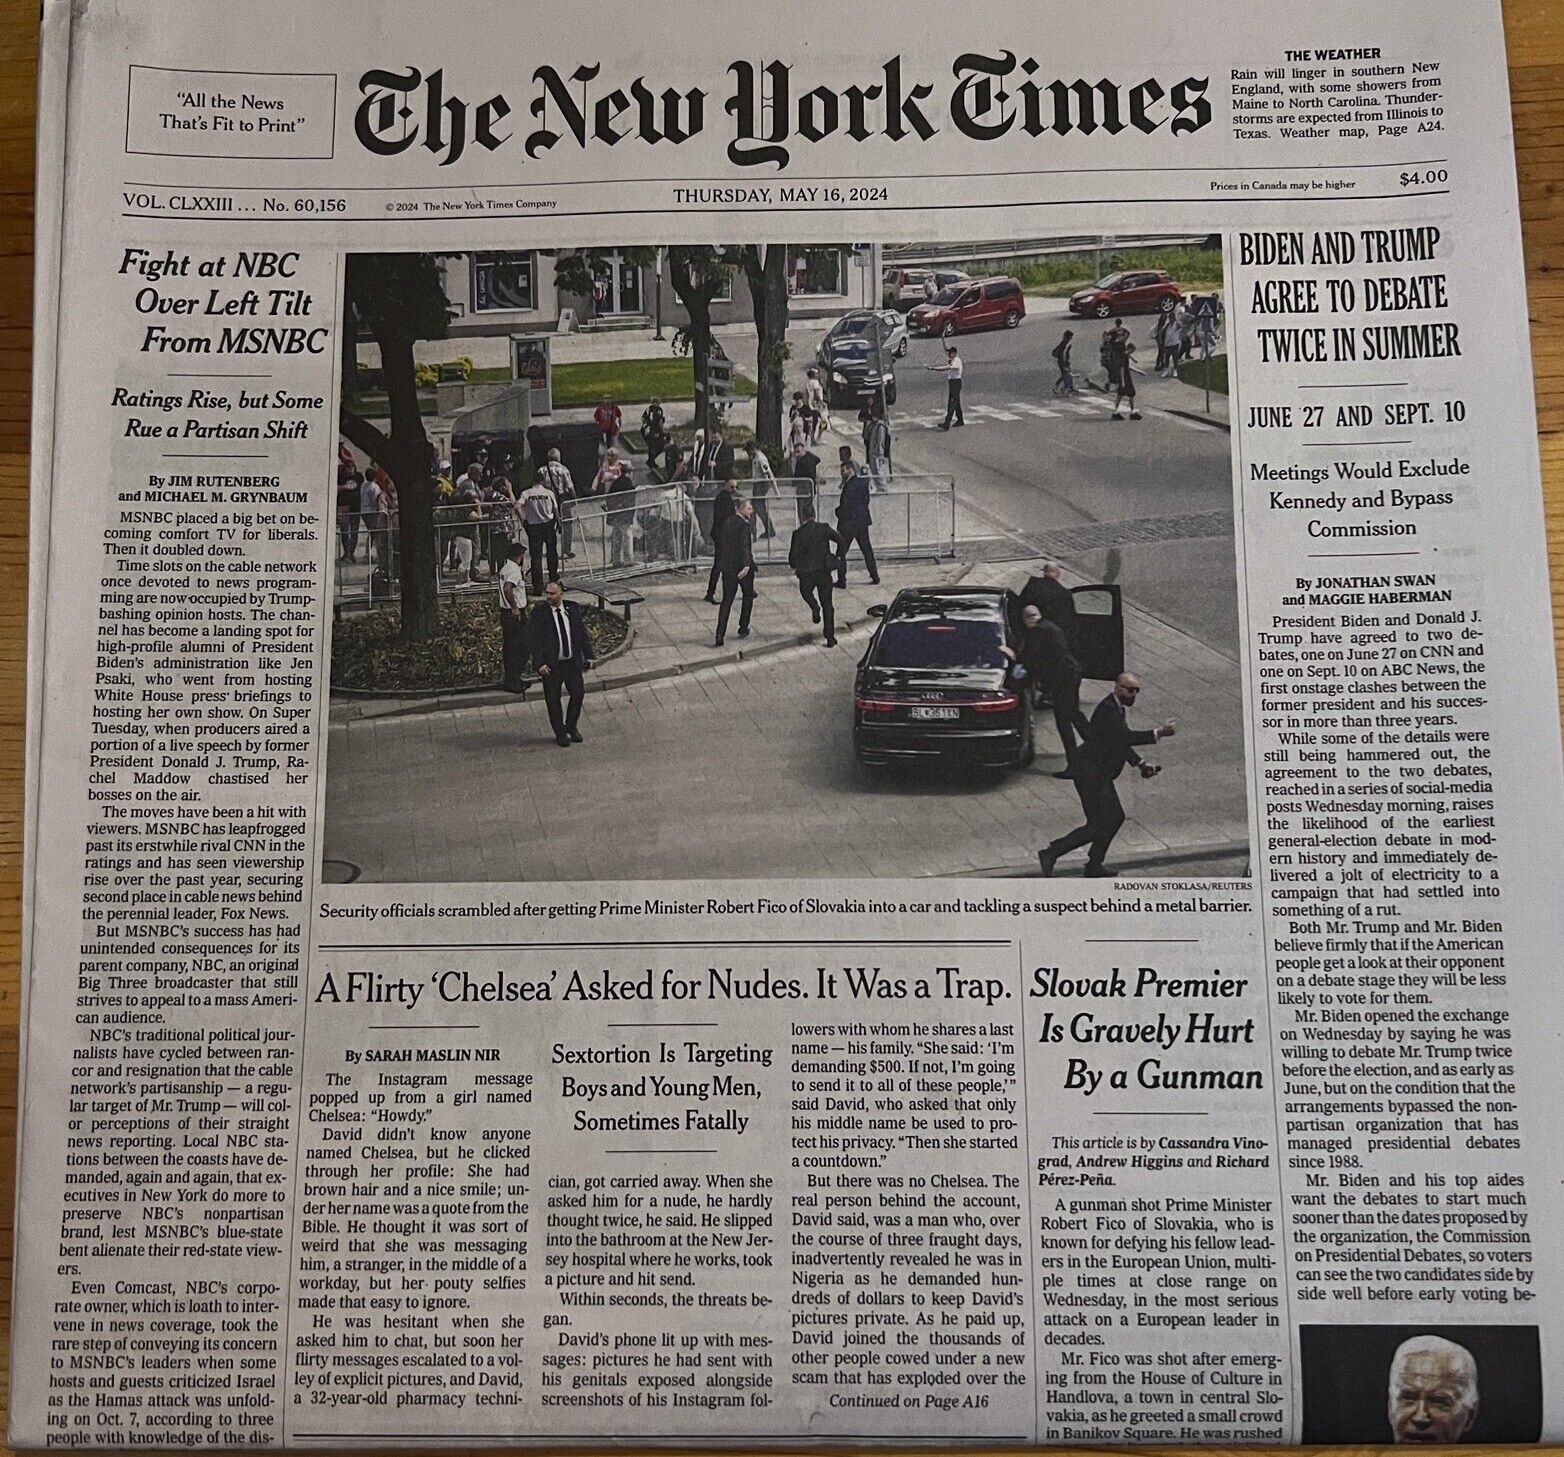 The New York Times Paper May 16 2024 Biden-Trump Agree to Debate Twice In Summer